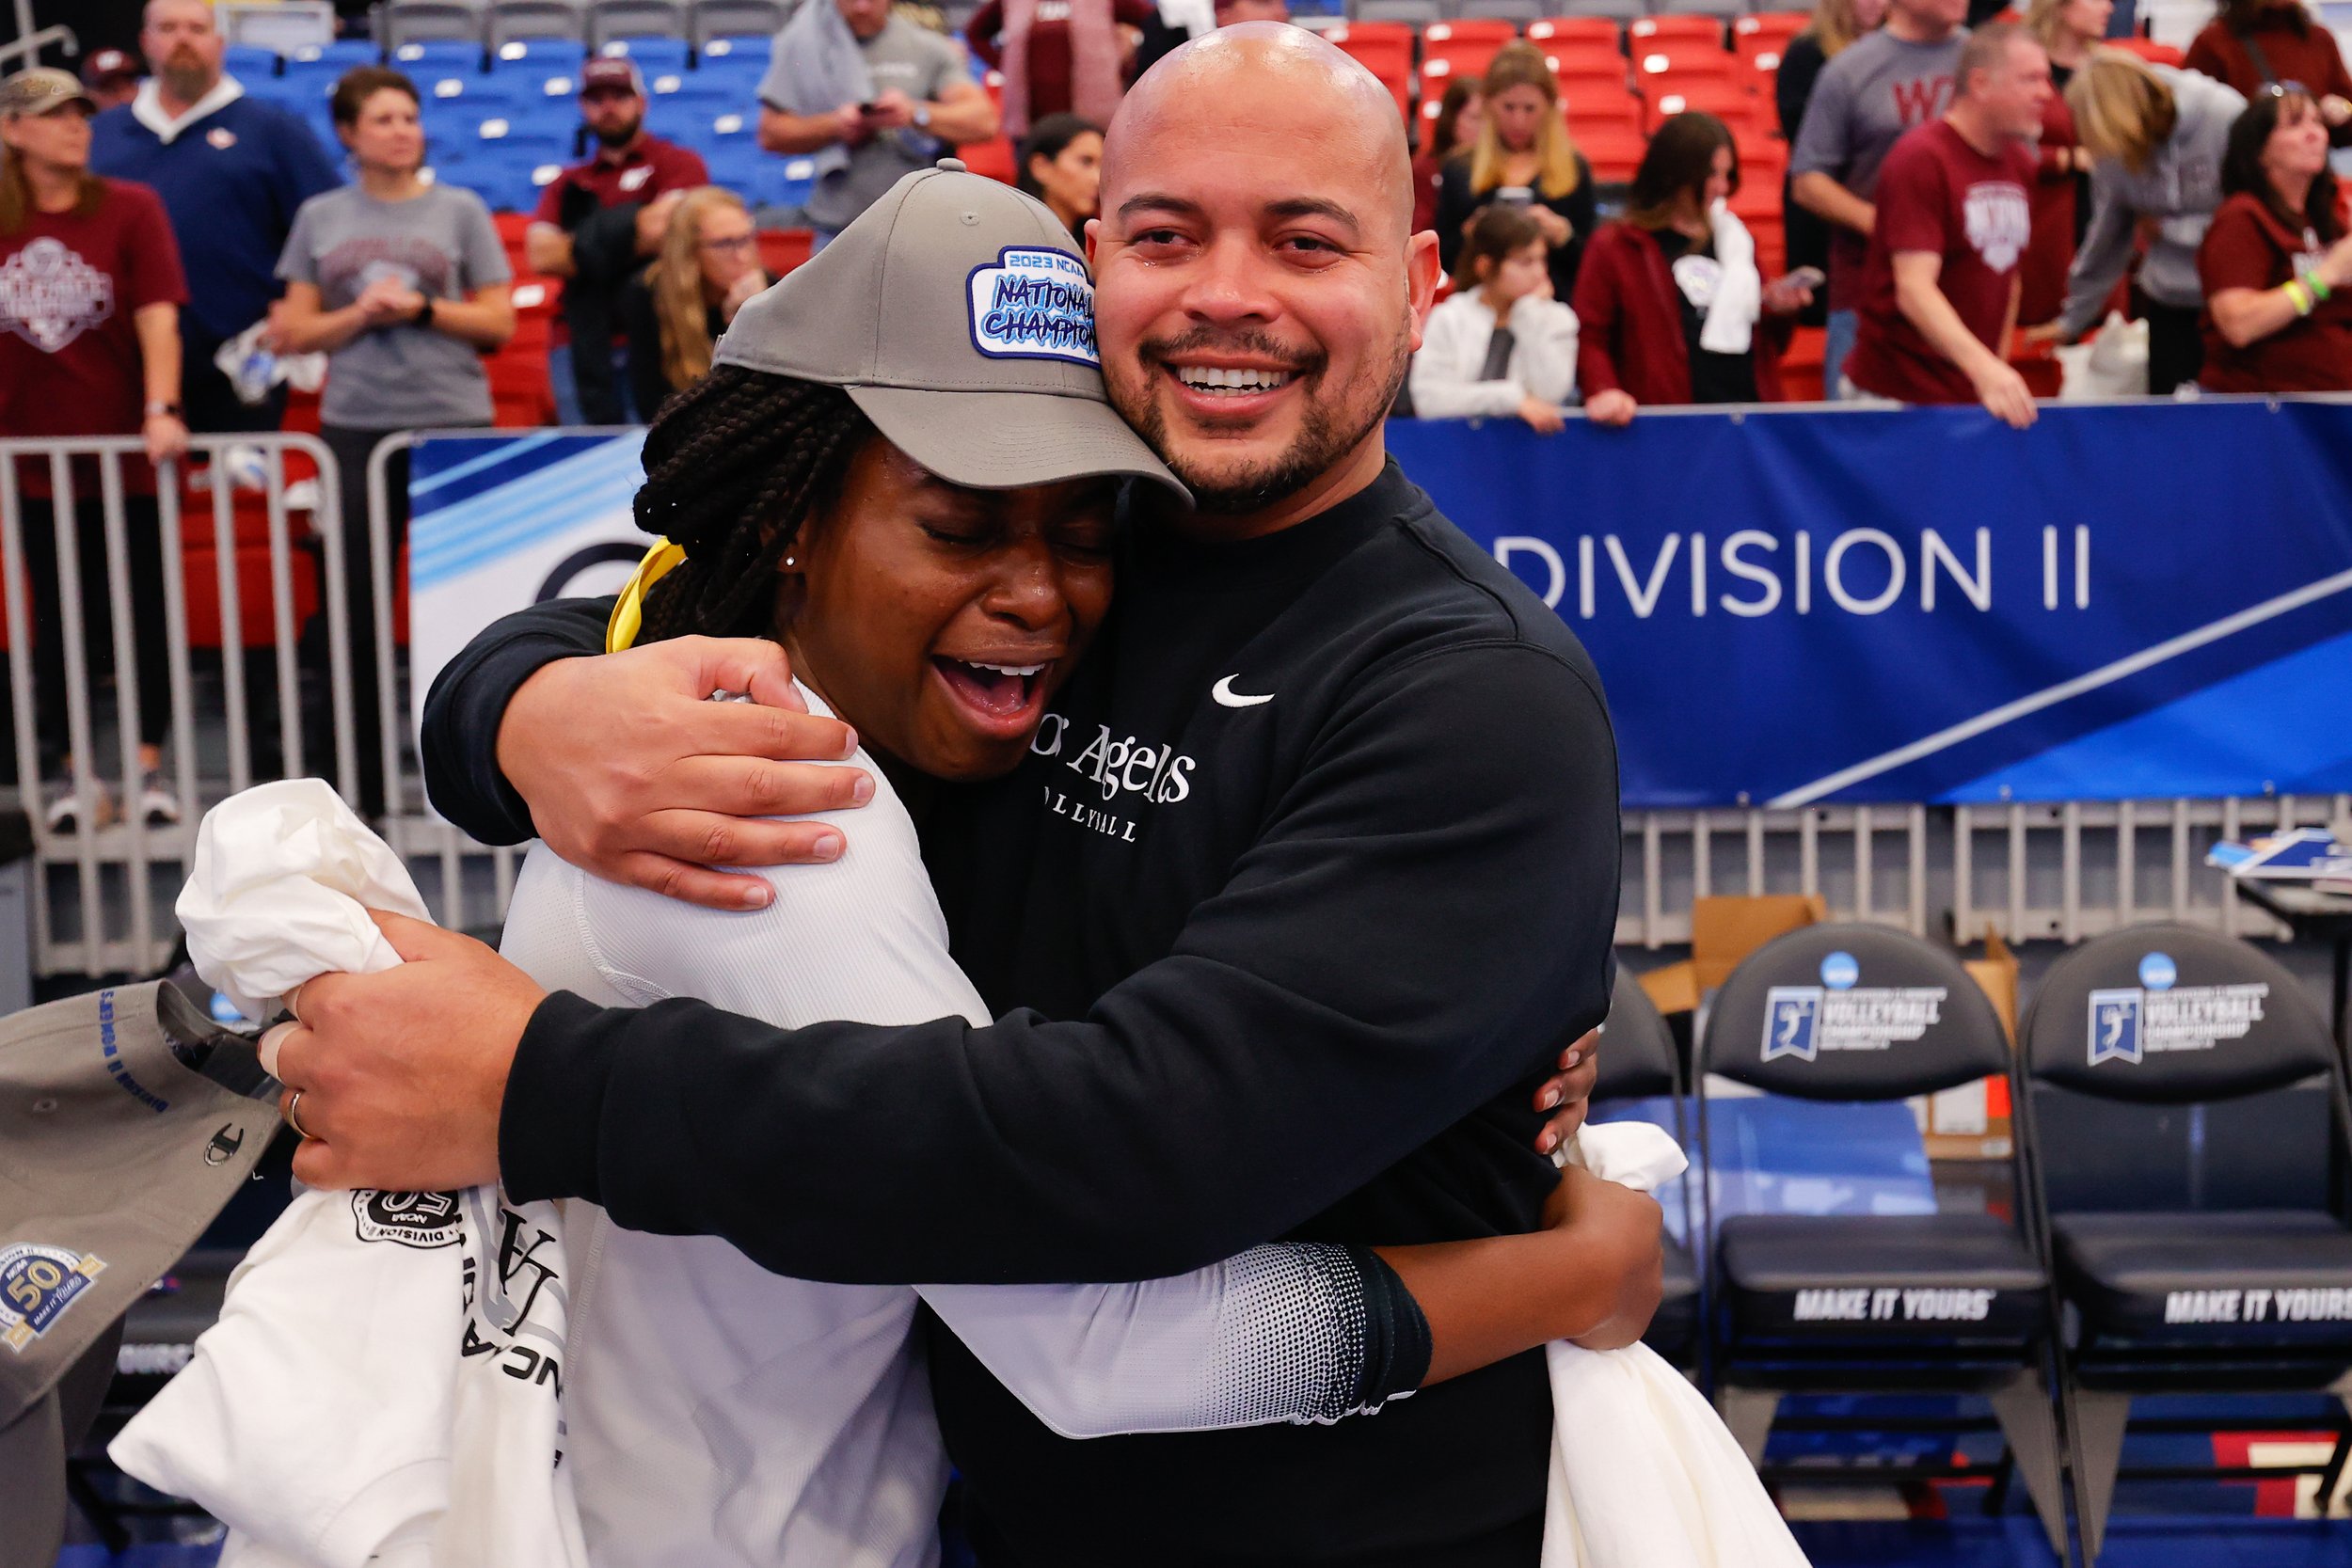  MOON TOWNSHIP, PENNSYLVANIA - DECEMBER 9: Haley Roundtree #11 of Cal State Los Angeles Golden Eagles hugs head coach Juan Figueroa of Cal State Los Angeles Golden Eagles after defeating the West Texas A&M Buffs to win the Division II Women's Volleyb